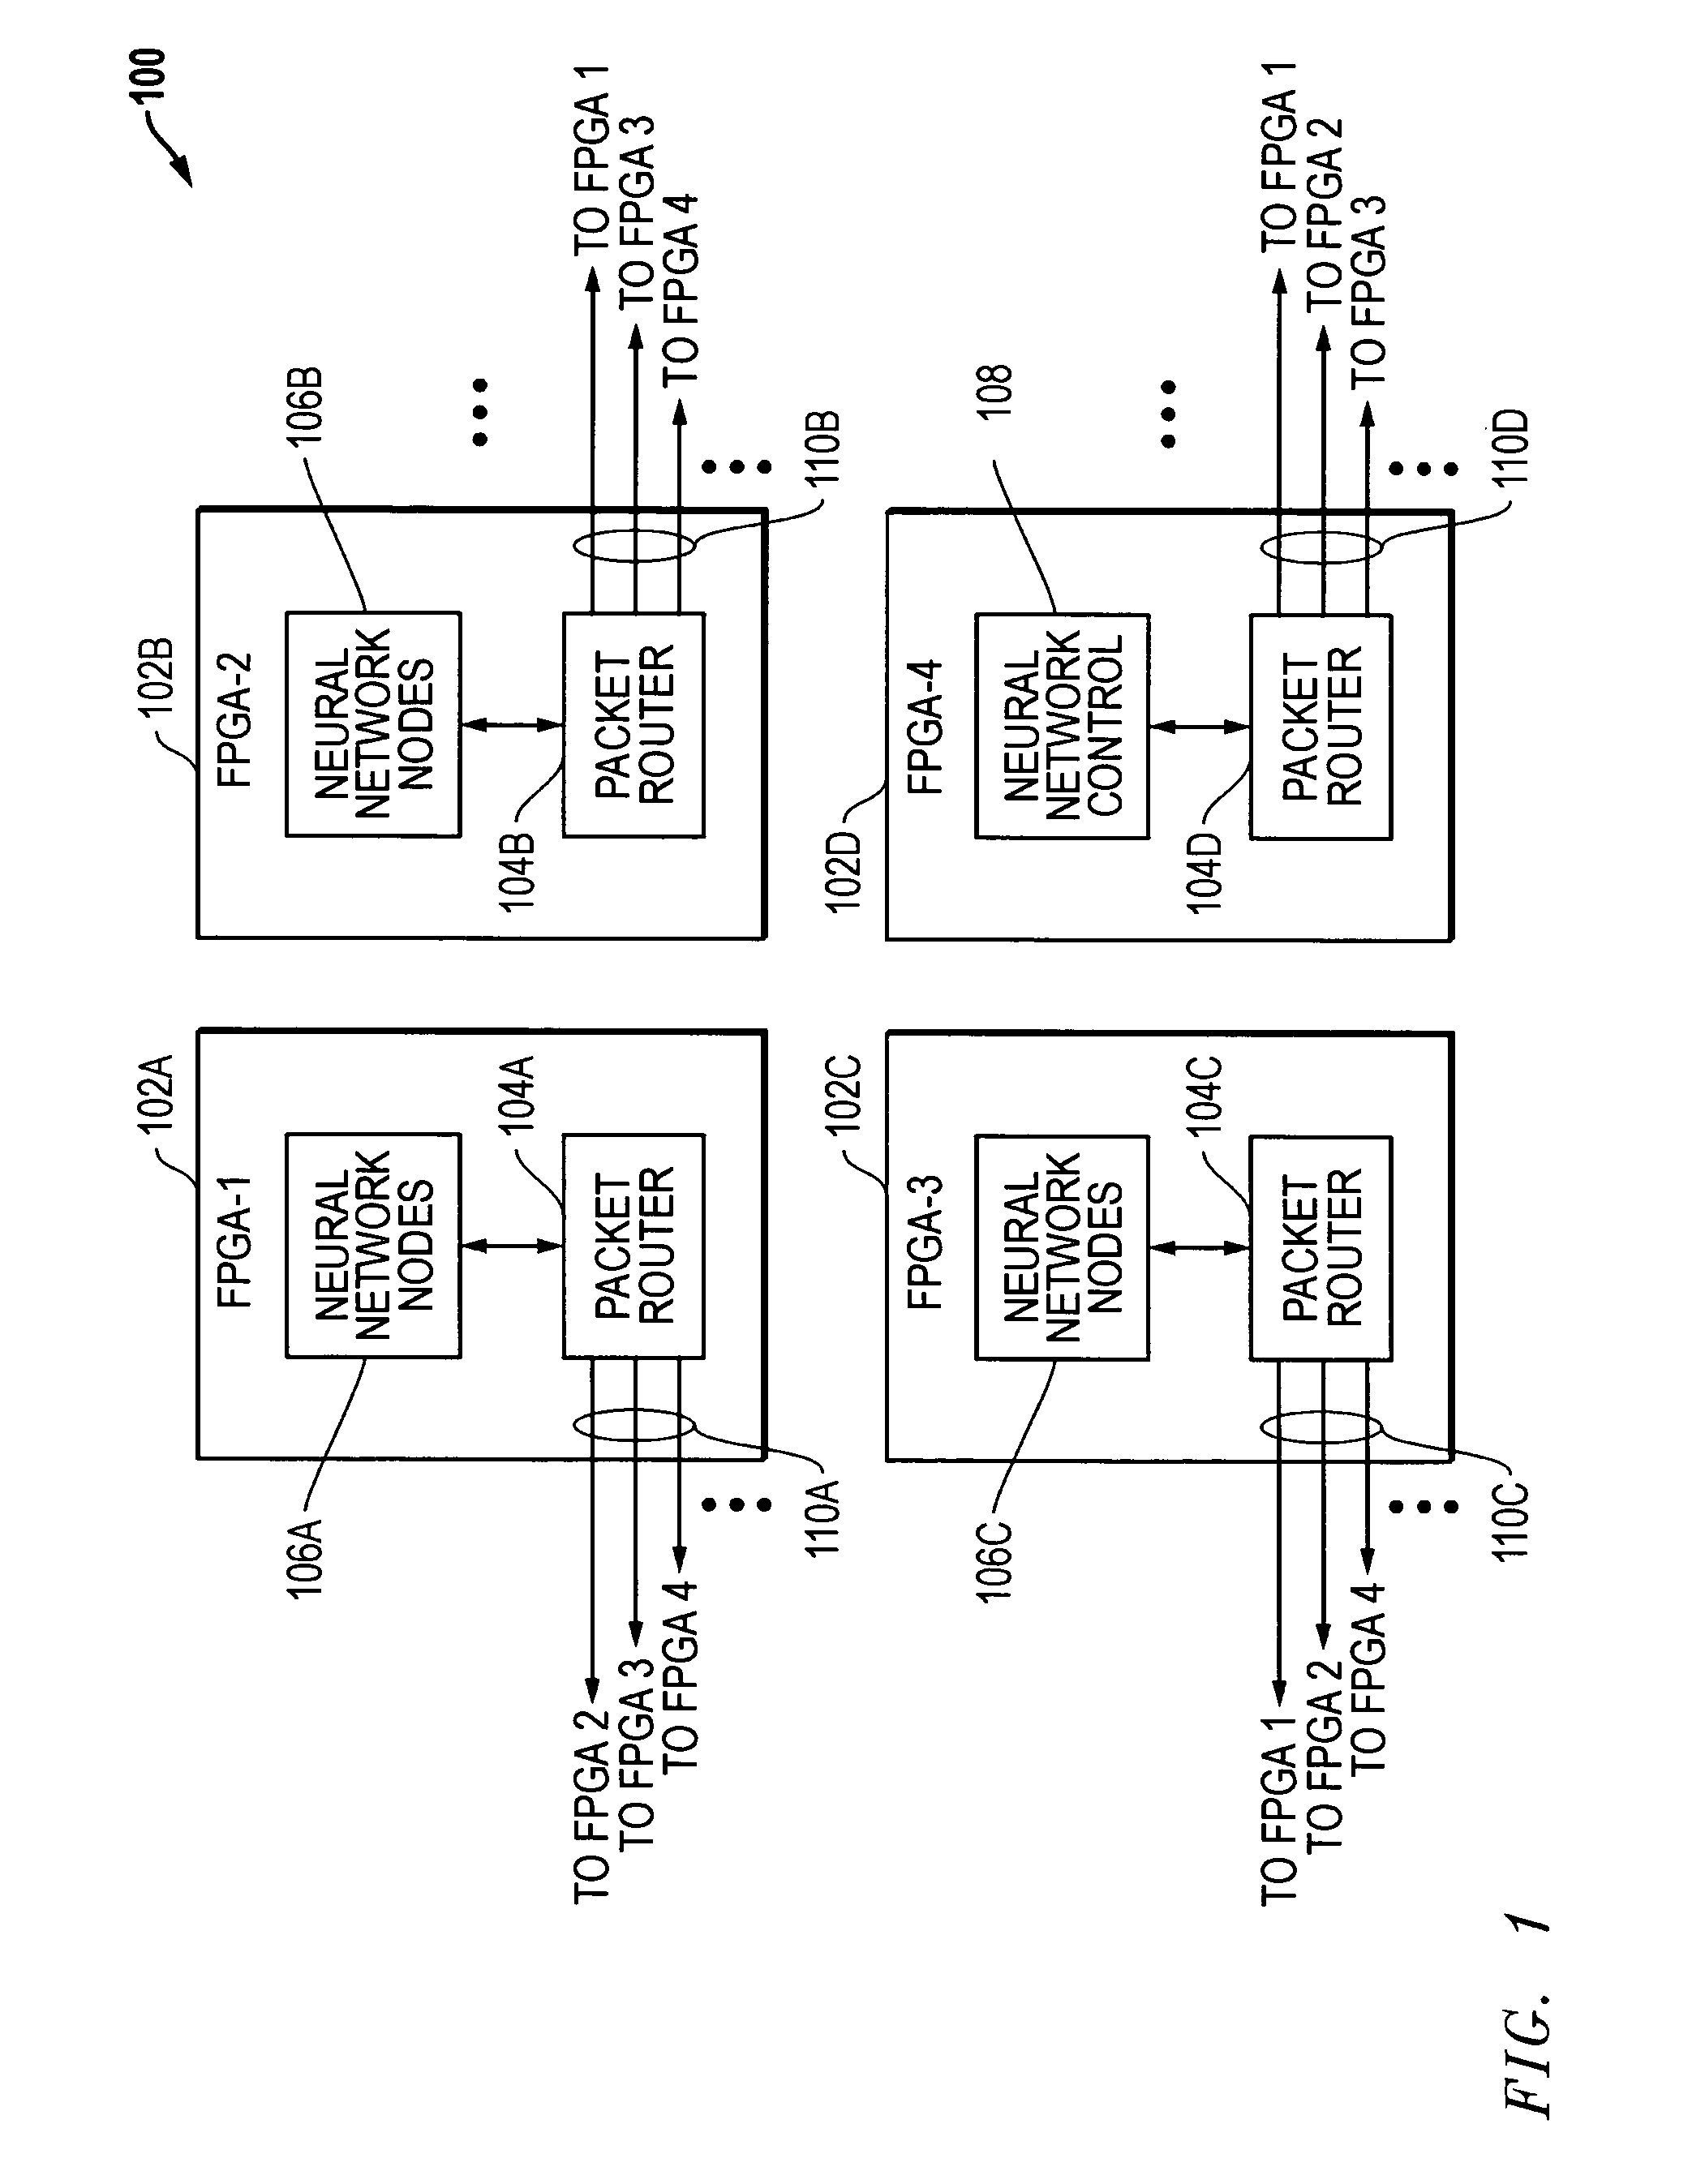 Reconfigurable neural network systems and methods utilizing FPGAs having packet routers